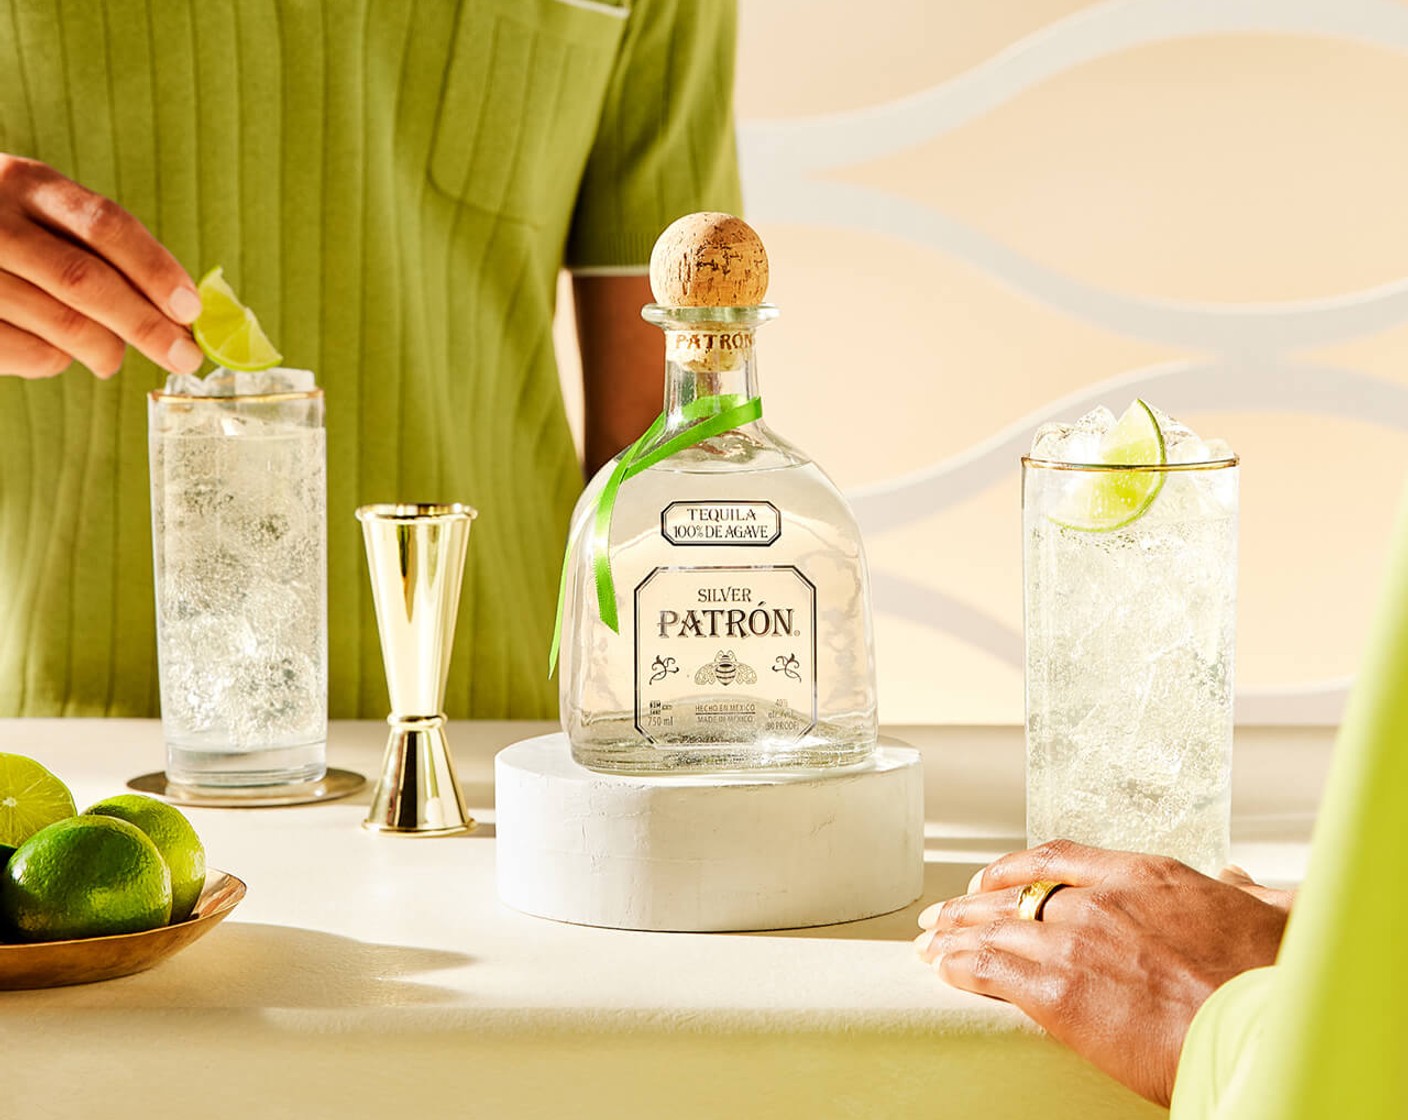 step 6 Top with your preferred Sparkling Water (24 fl oz) and stir gently to combine.